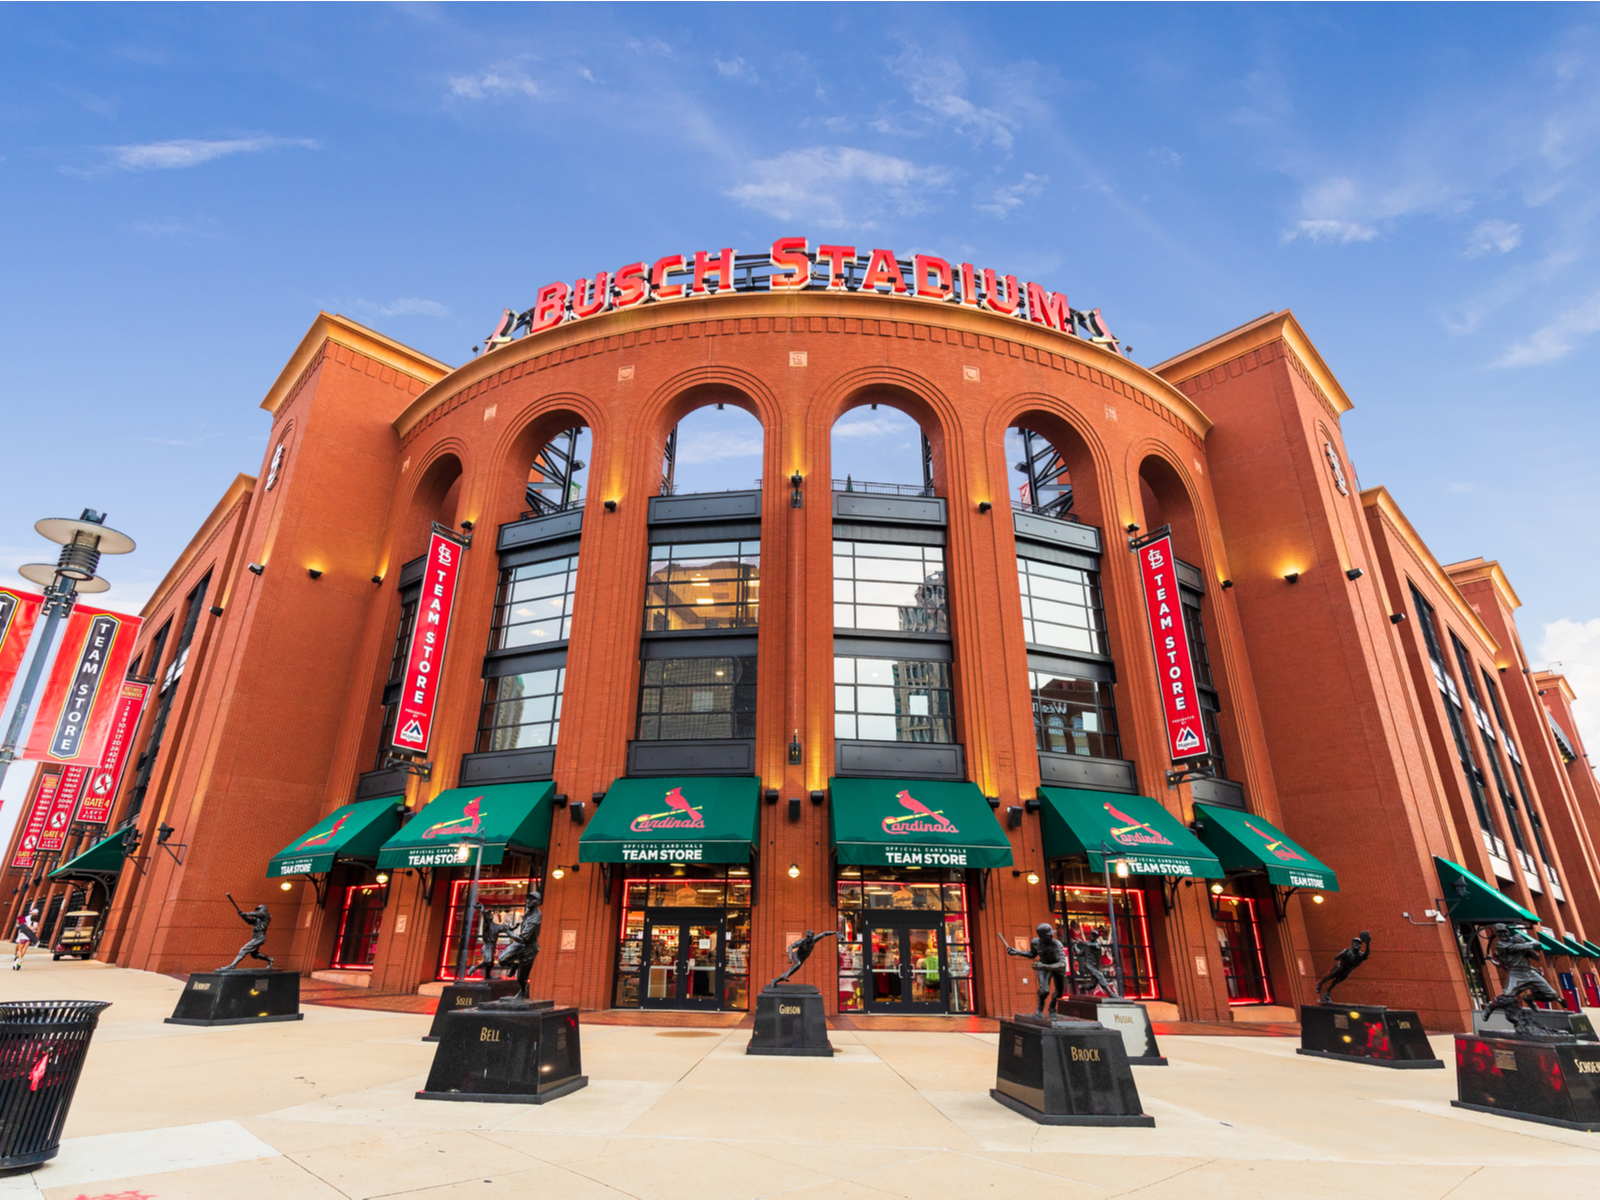 Busch Stadium pictured outside the entrance for a piece titled Is St. Louis Safe